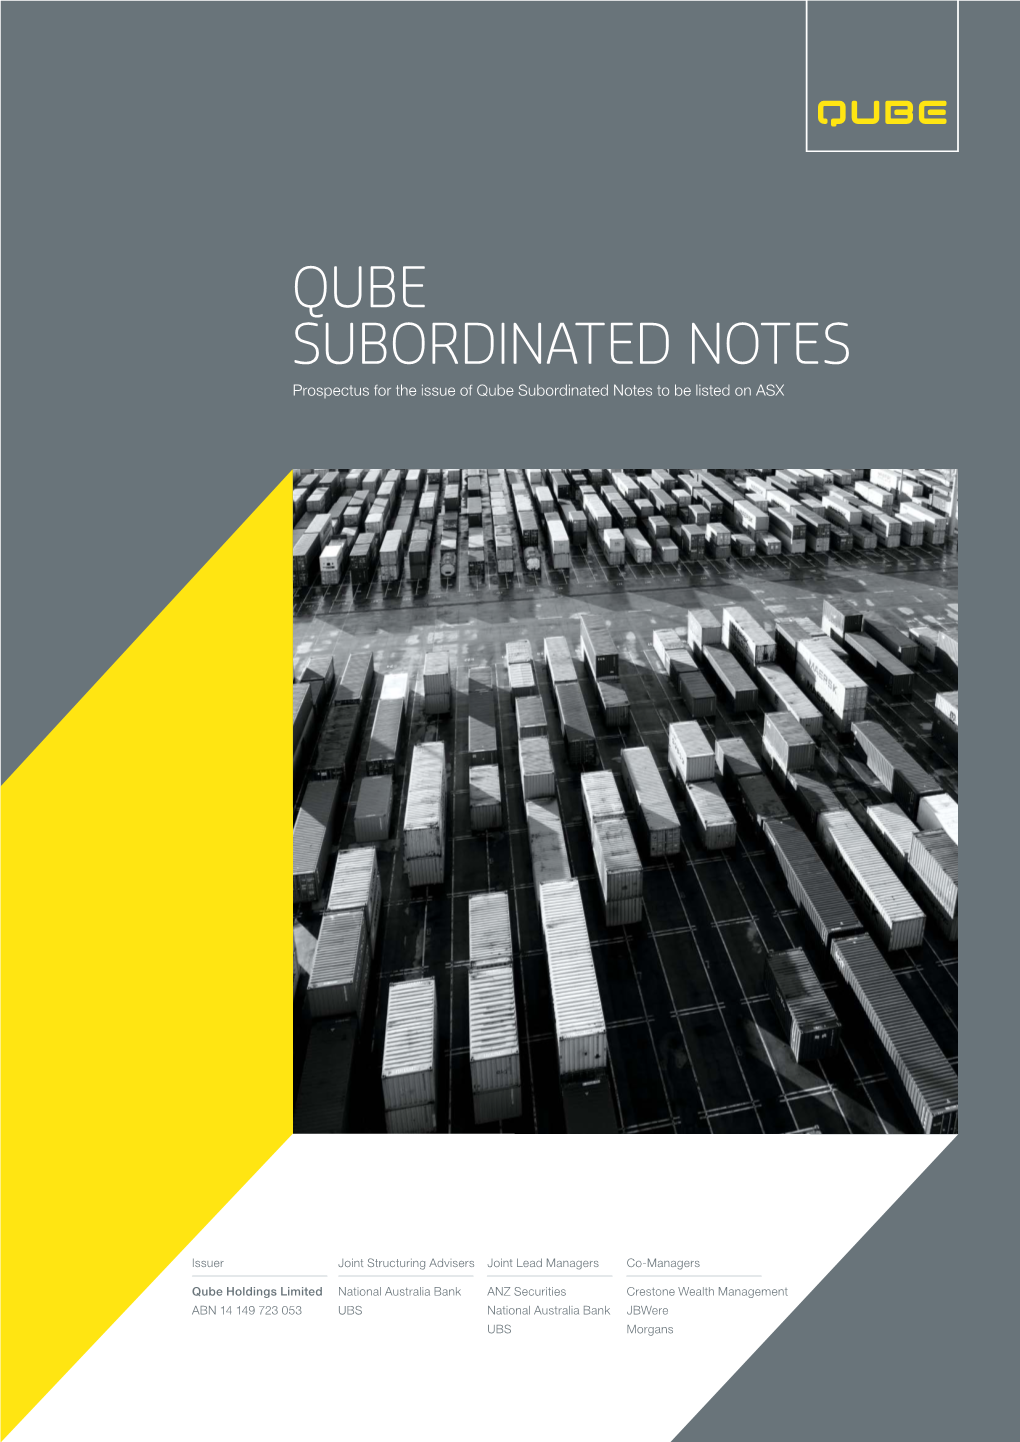 QUBE SUBORDINATED NOTES Prospectus for the Issue of Qube Subordinated Notes to Be Listed on ASX